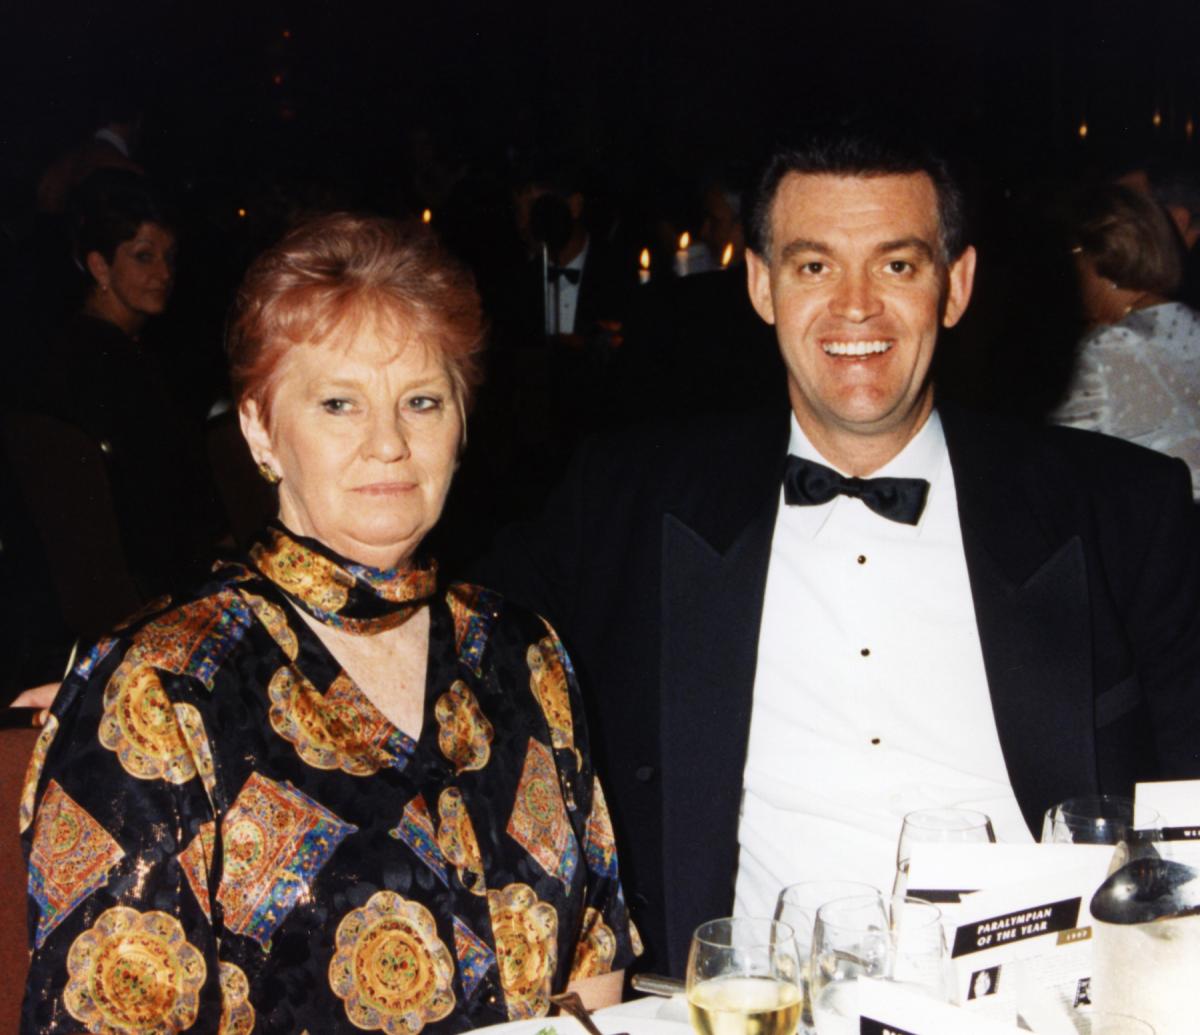 Marie Little pictured with Michael Knight, Chairman of the Sydney Organising Committee of the Olympic Games (SOCOG).